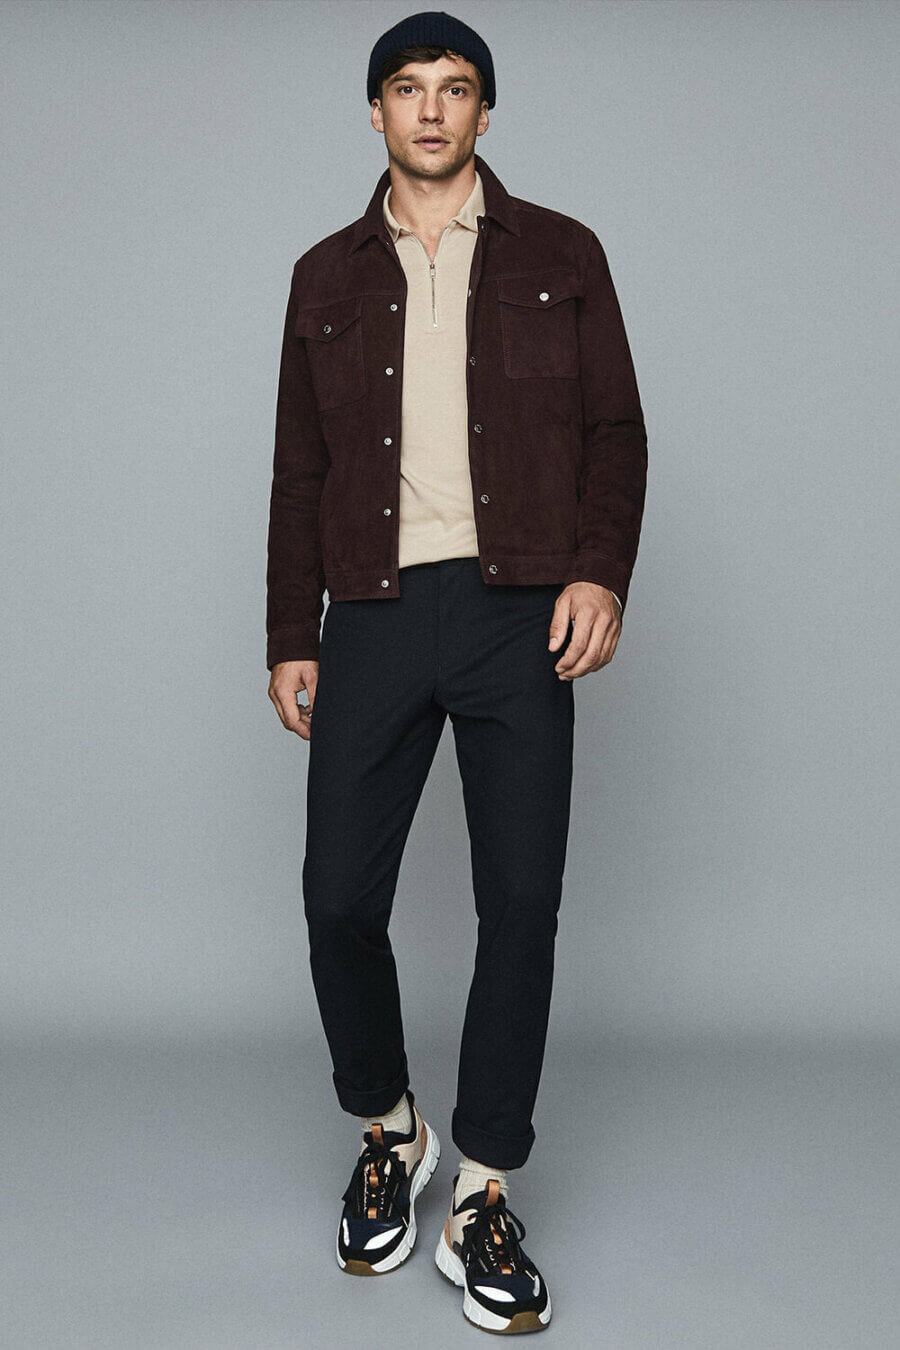 Men's zip neck polo shirt with suede trucker jacket and chinos